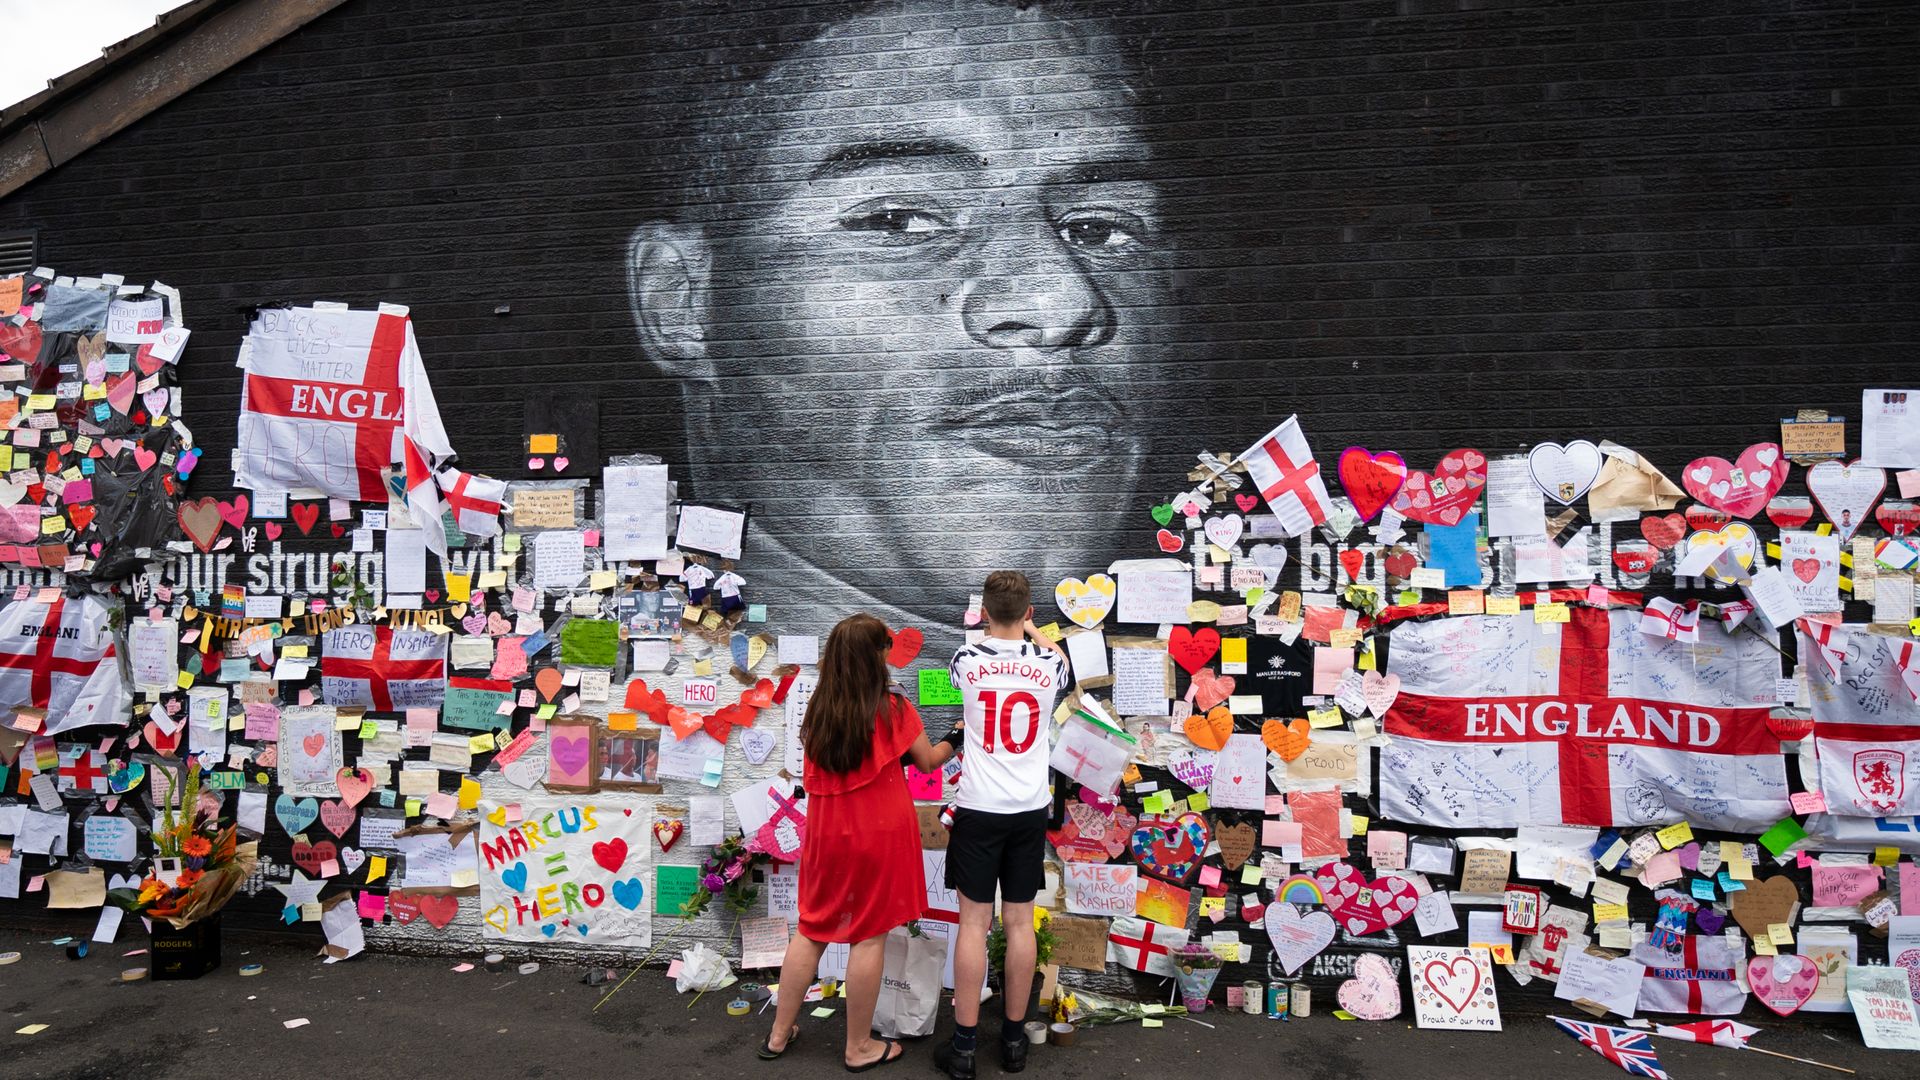 Rashford mural messages to be preserved